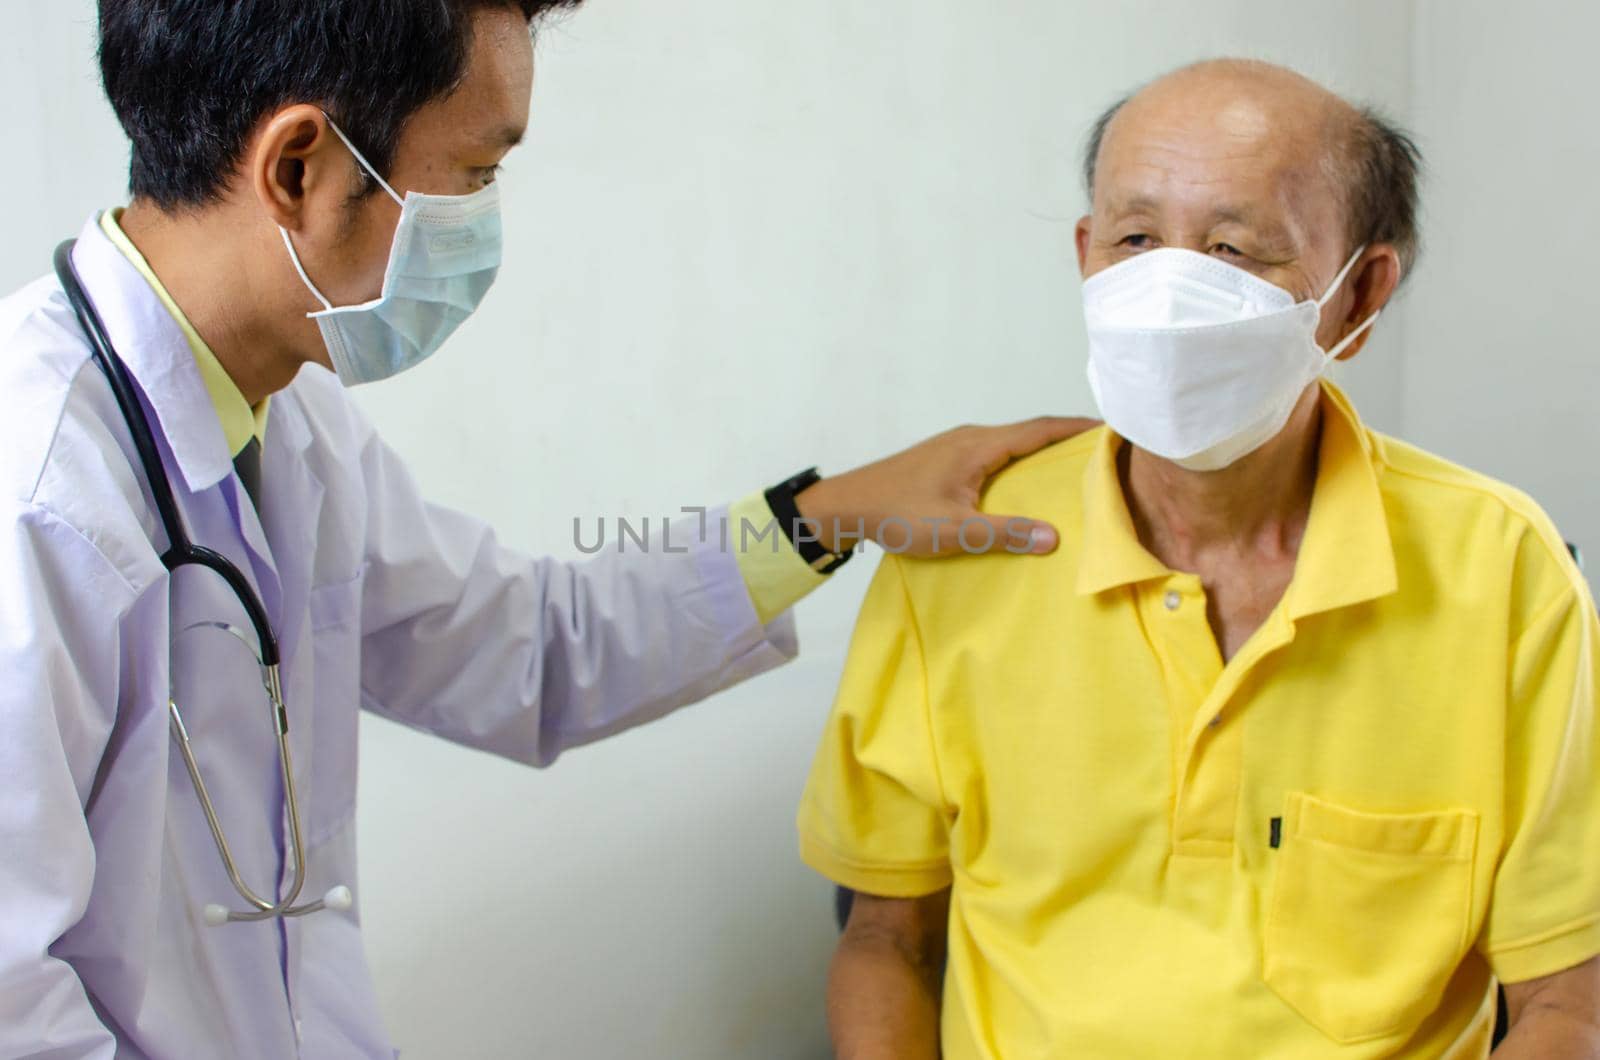 doctor held his shoulder and talked to an elderly man who was sick to give encouragement. by aoo3771